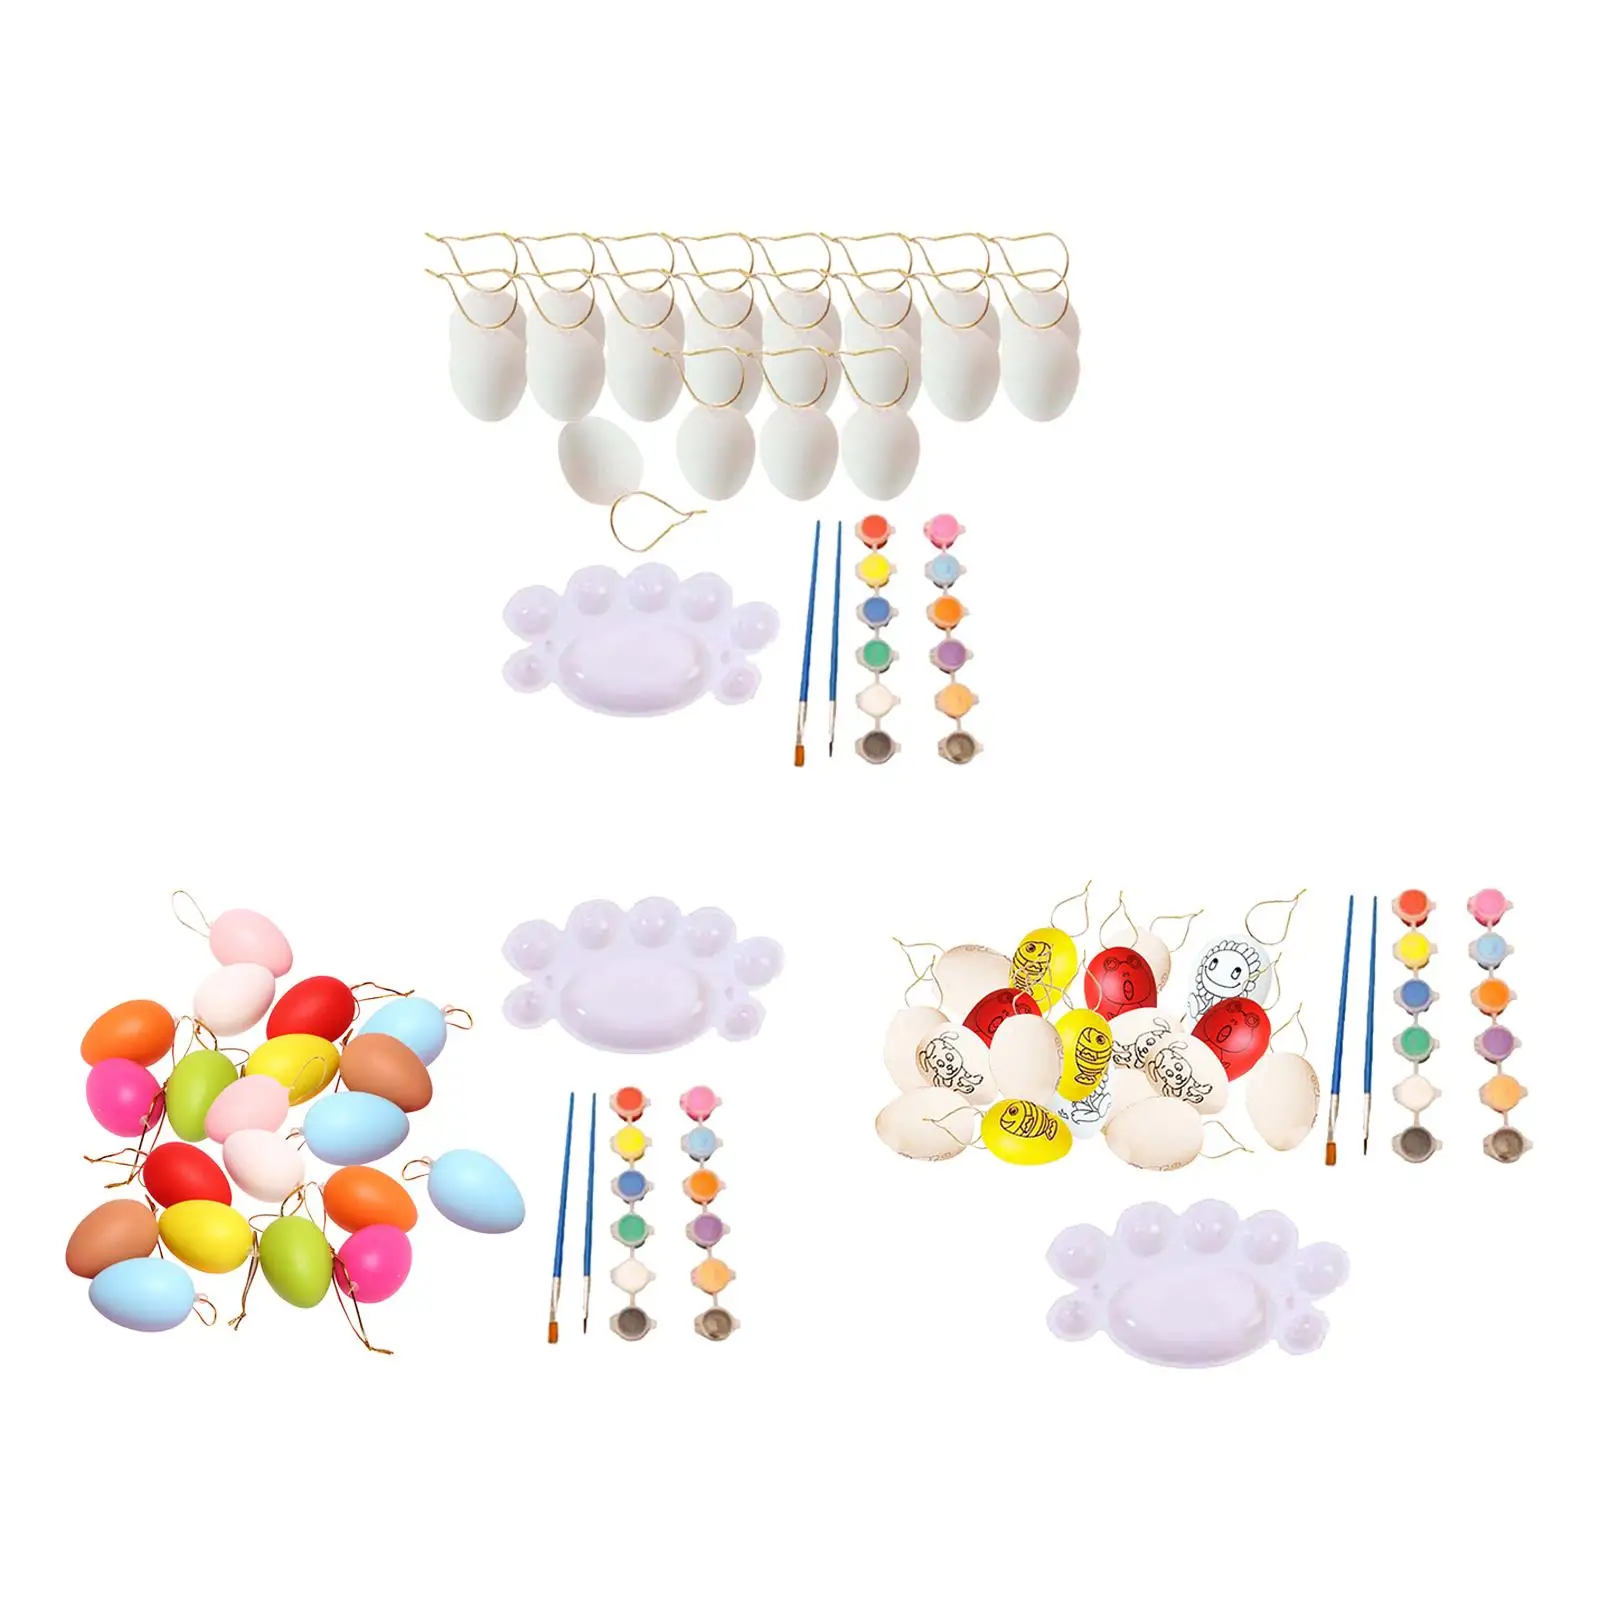 20x White Easter Eggs Painting DIY Easter Egg Decorating Set for Home Holiday Gifts